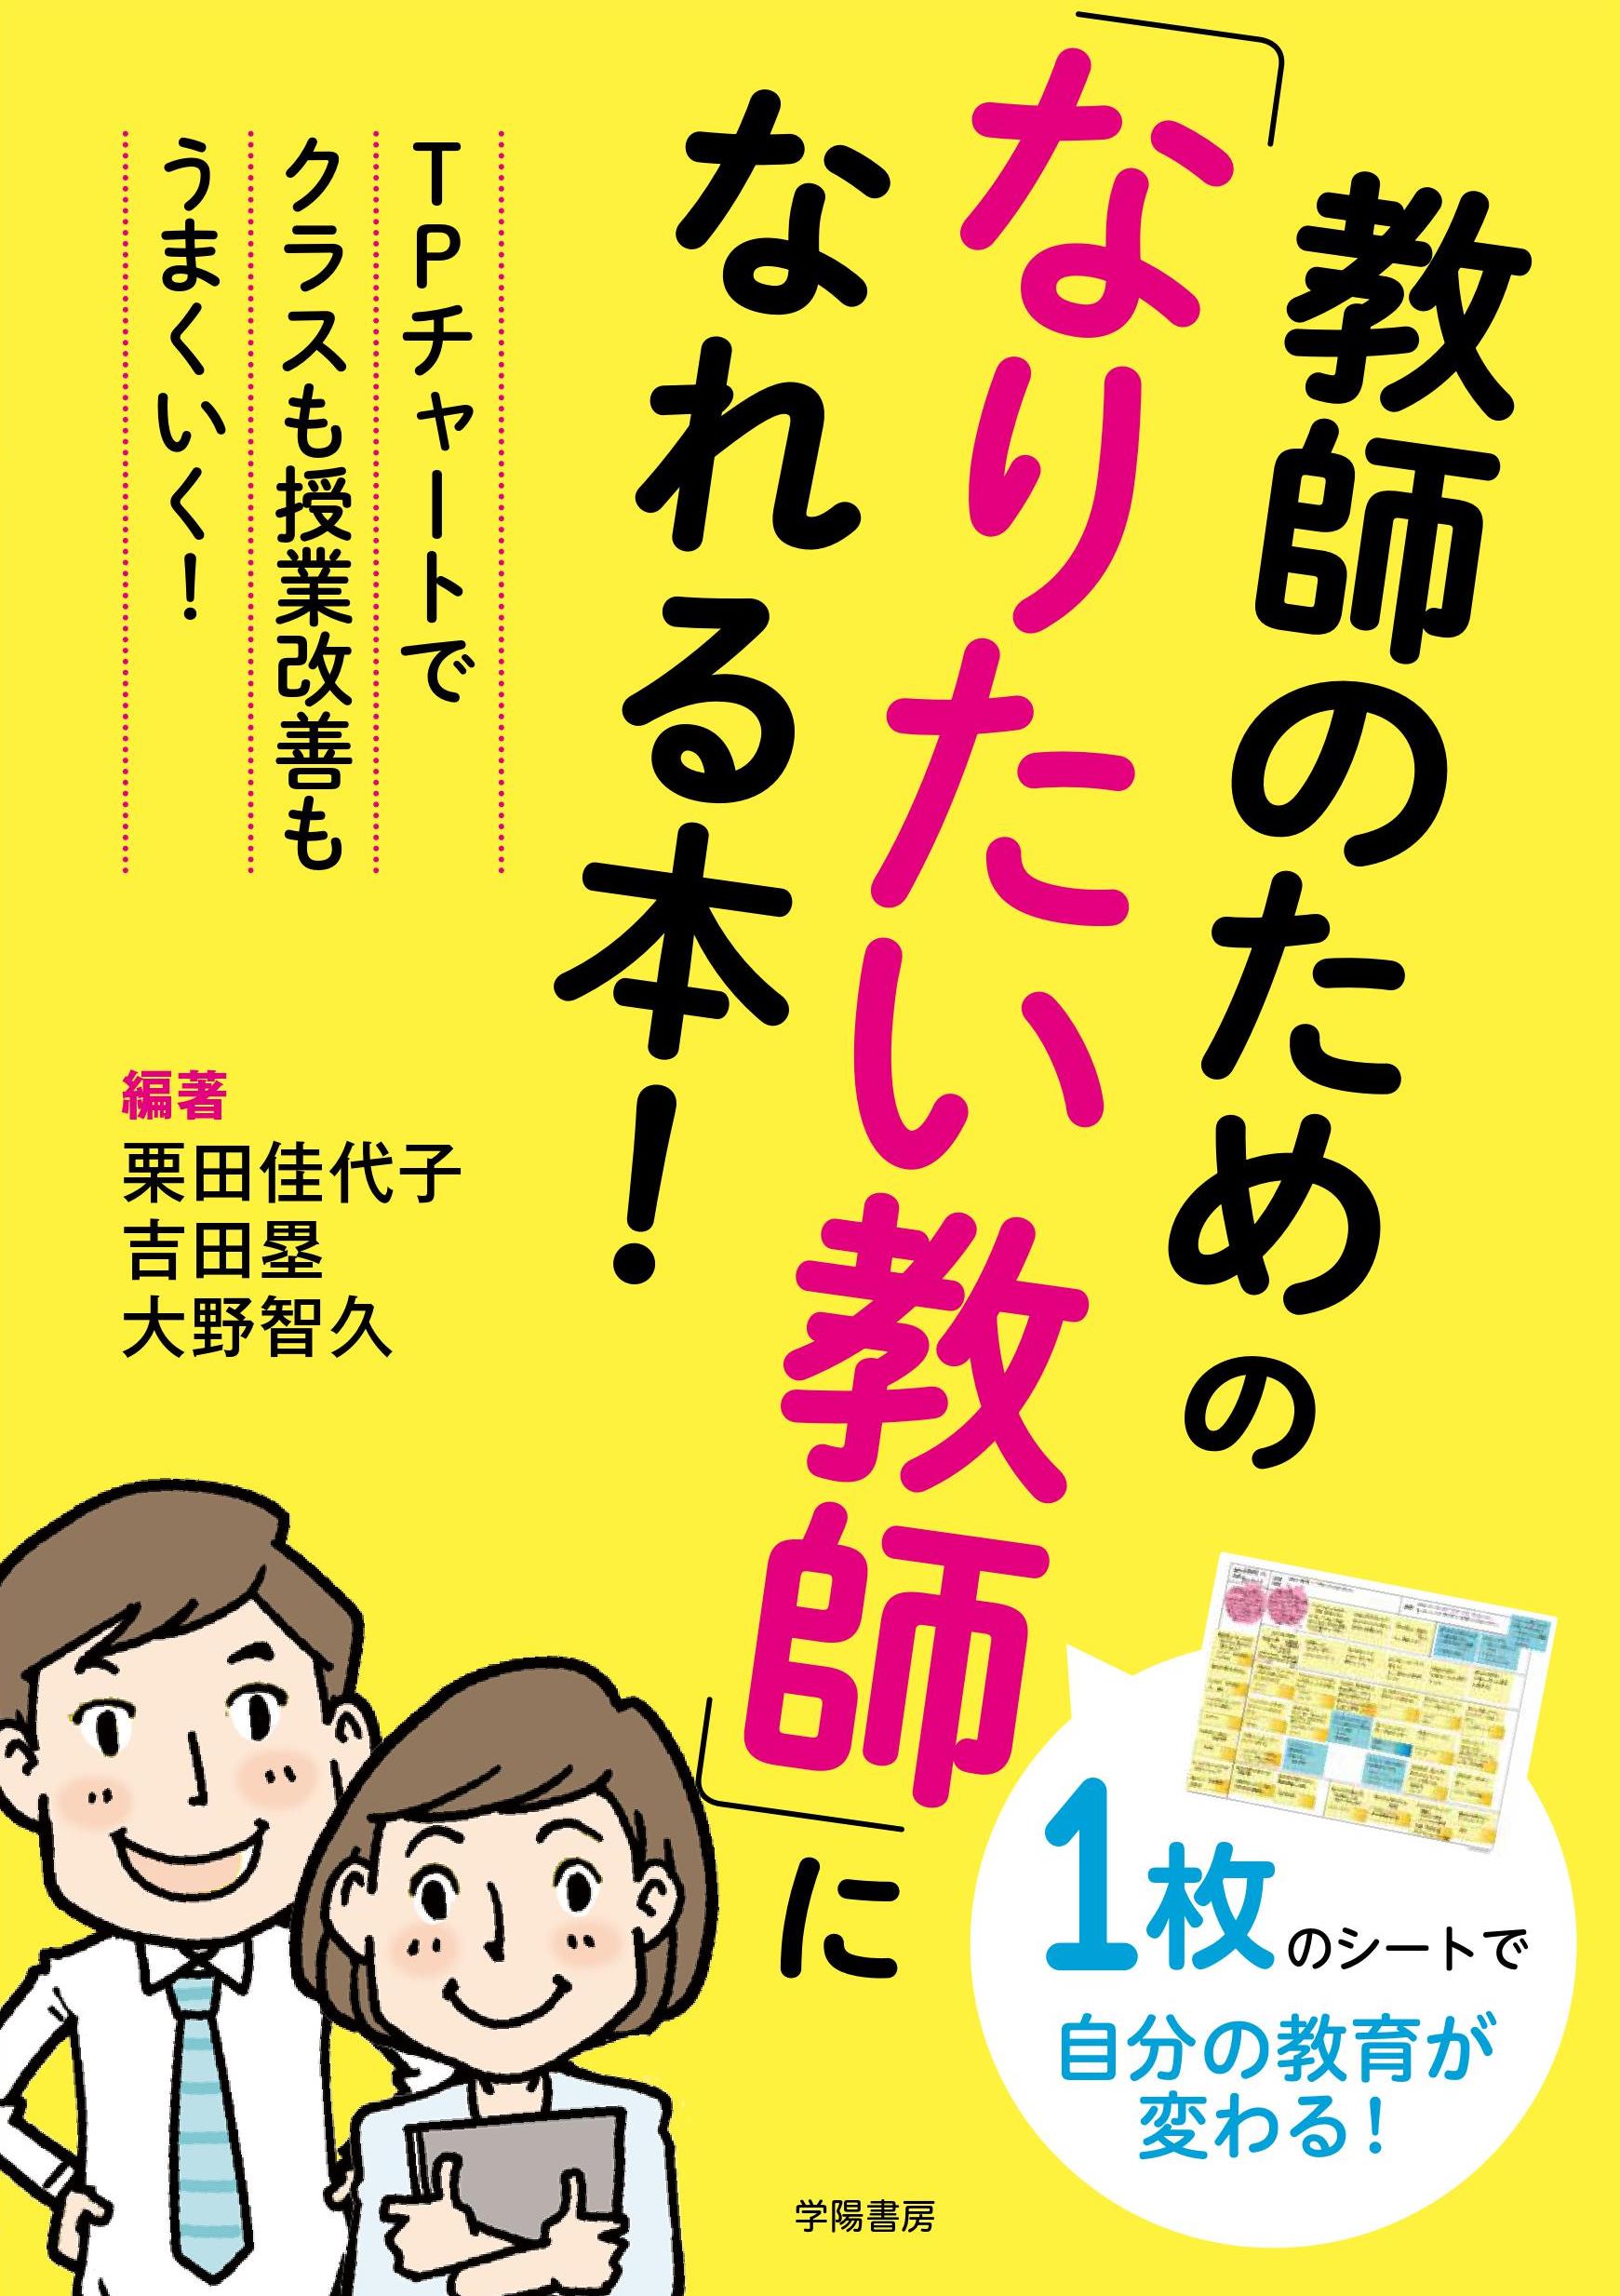 A yellow cover with illustrations of teachers